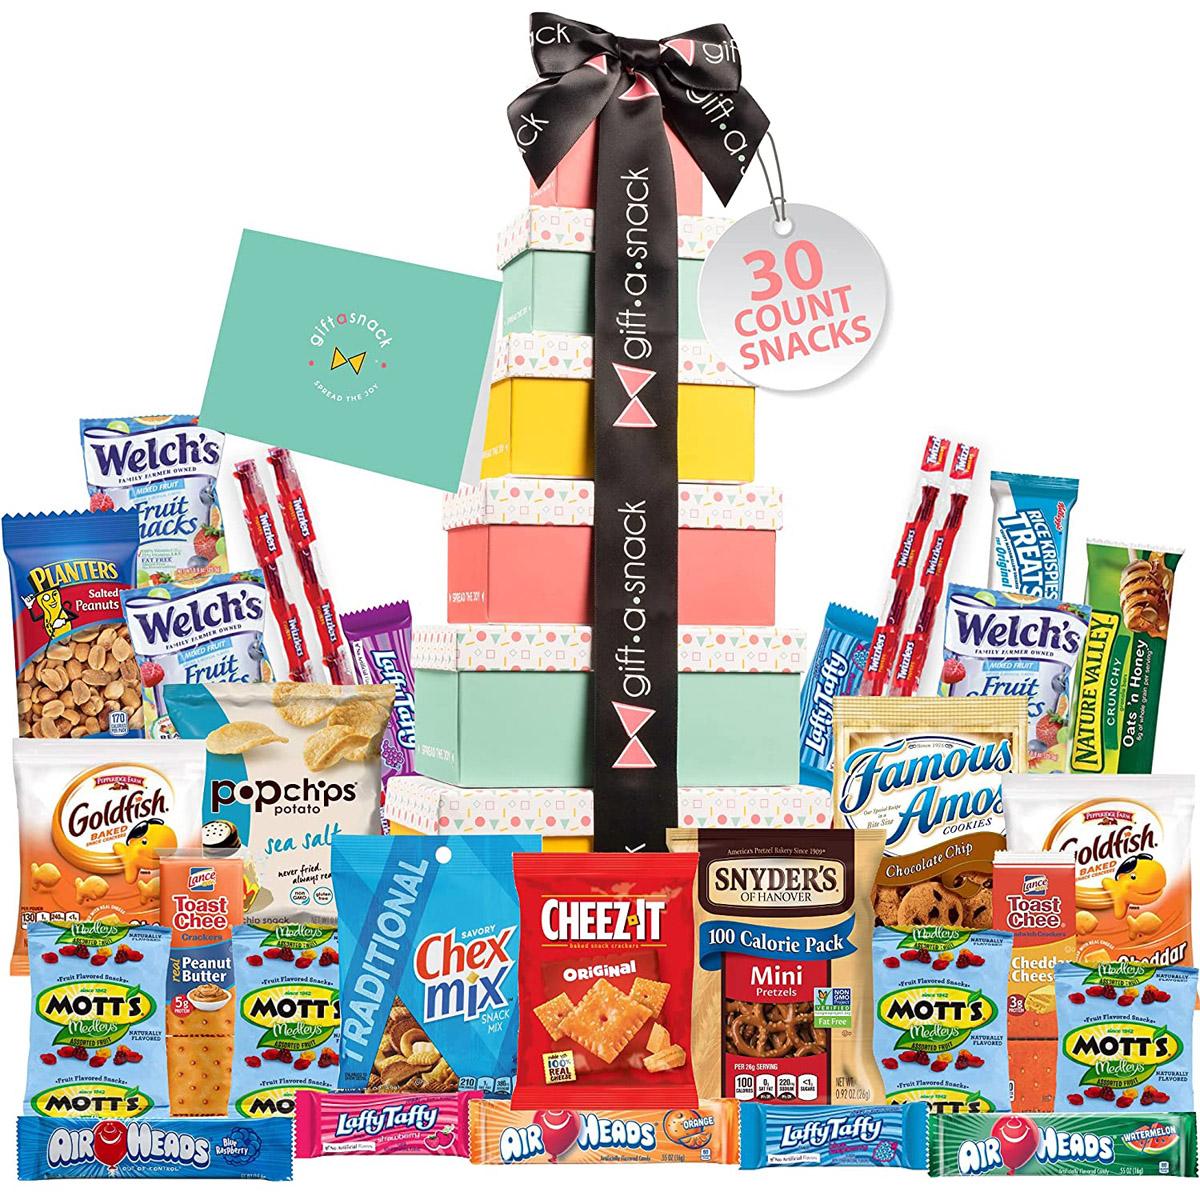 Tower Snack Box Variety Pack Care Graduation Package for $14.36 Shipped